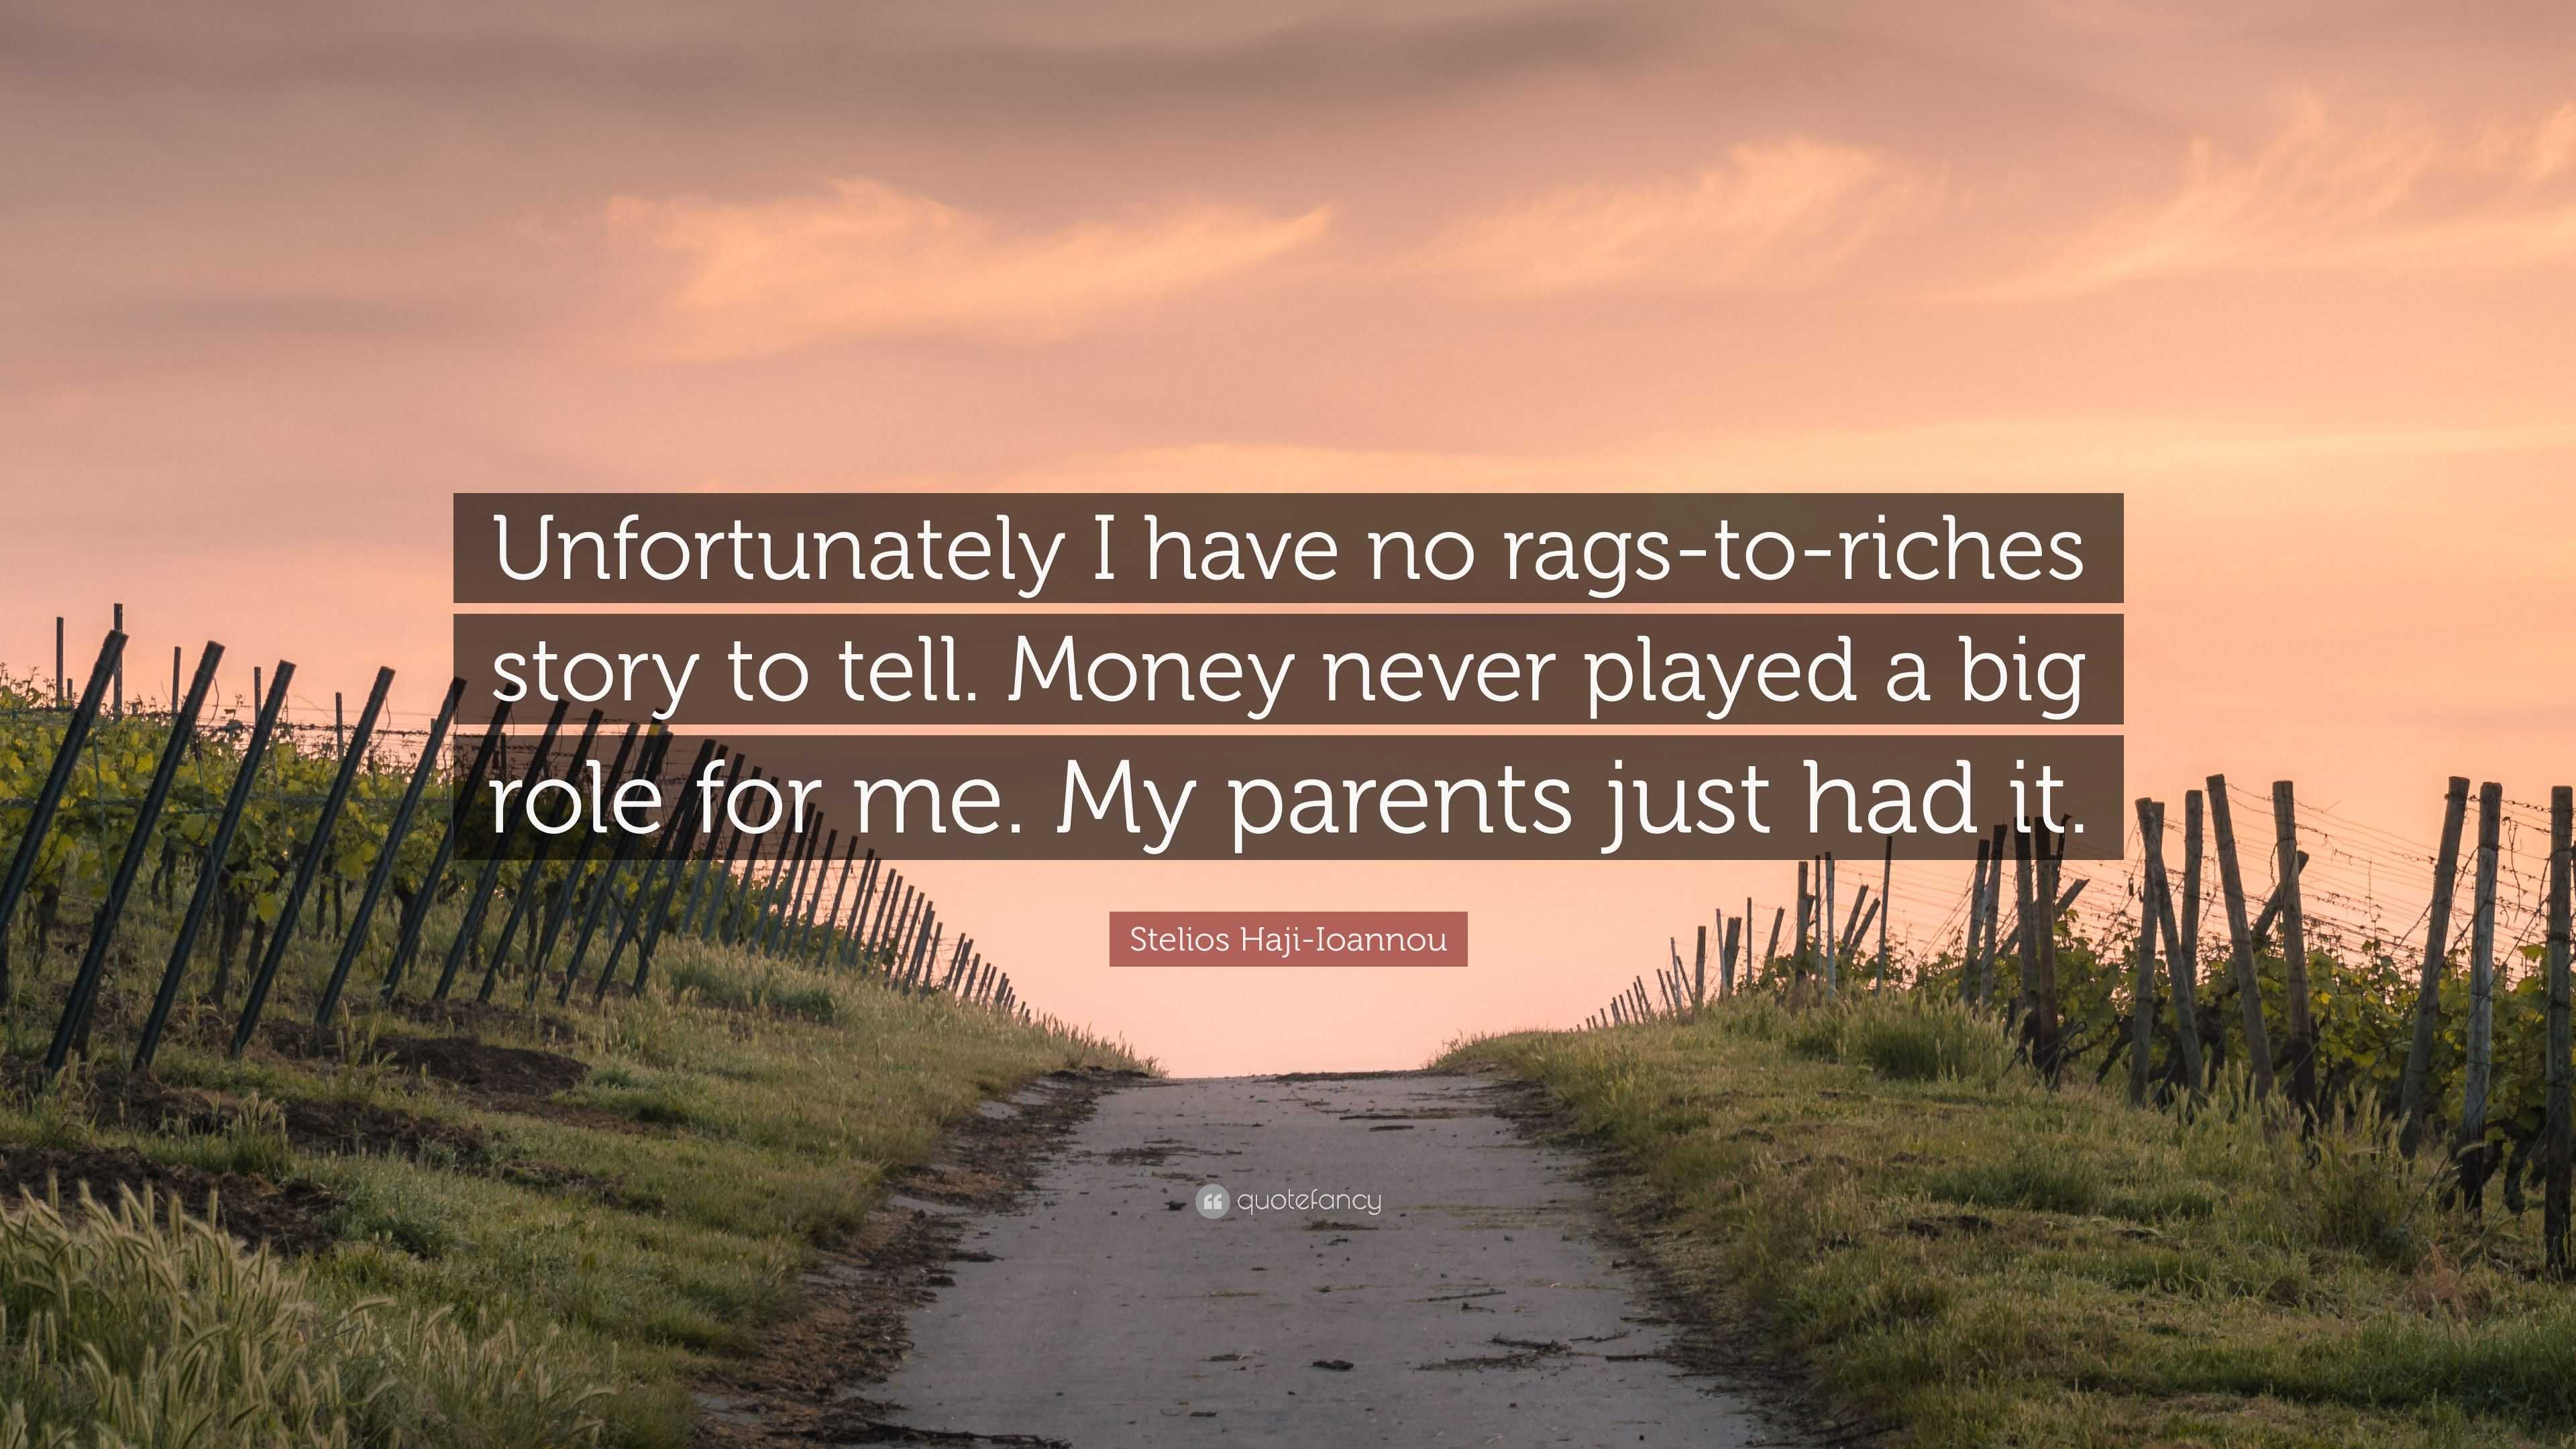 Rags to Riches? Why These Stories Are Doing More Harm Than Good